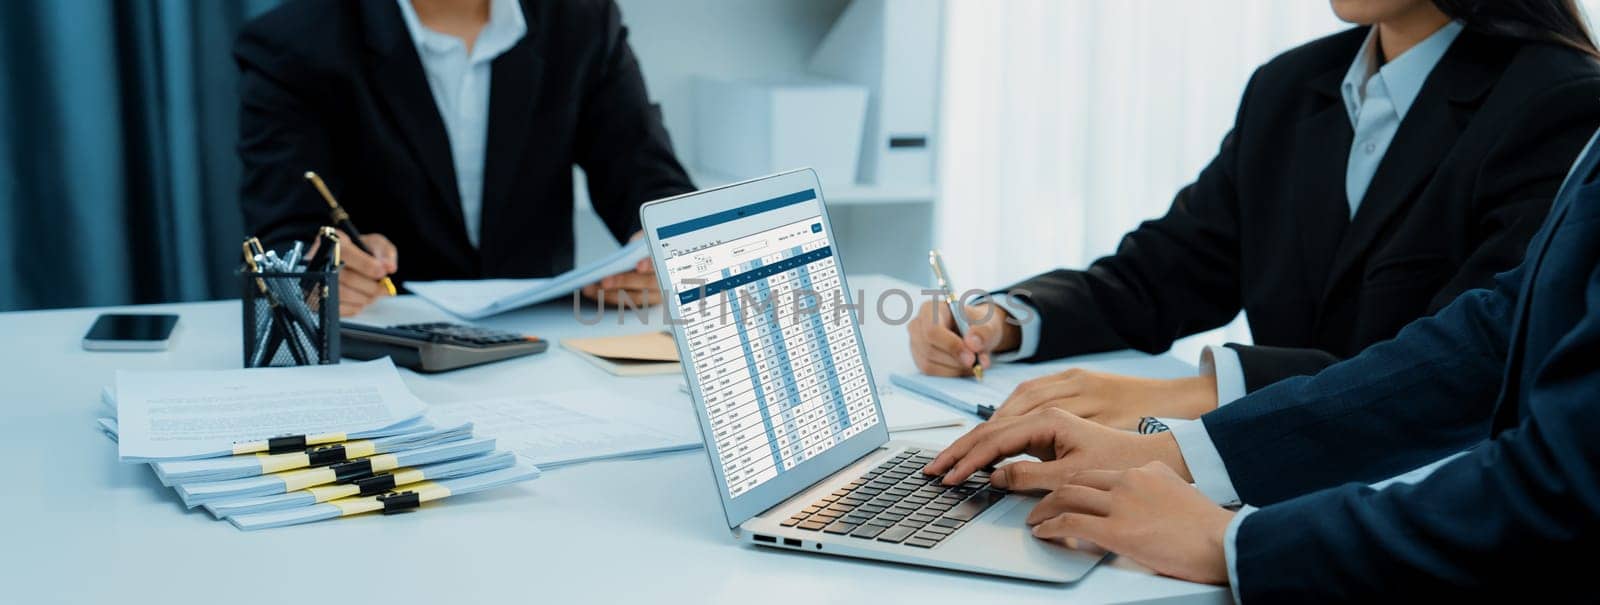 Corporate accountant use accounting software on laptop. Shrewd by biancoblue